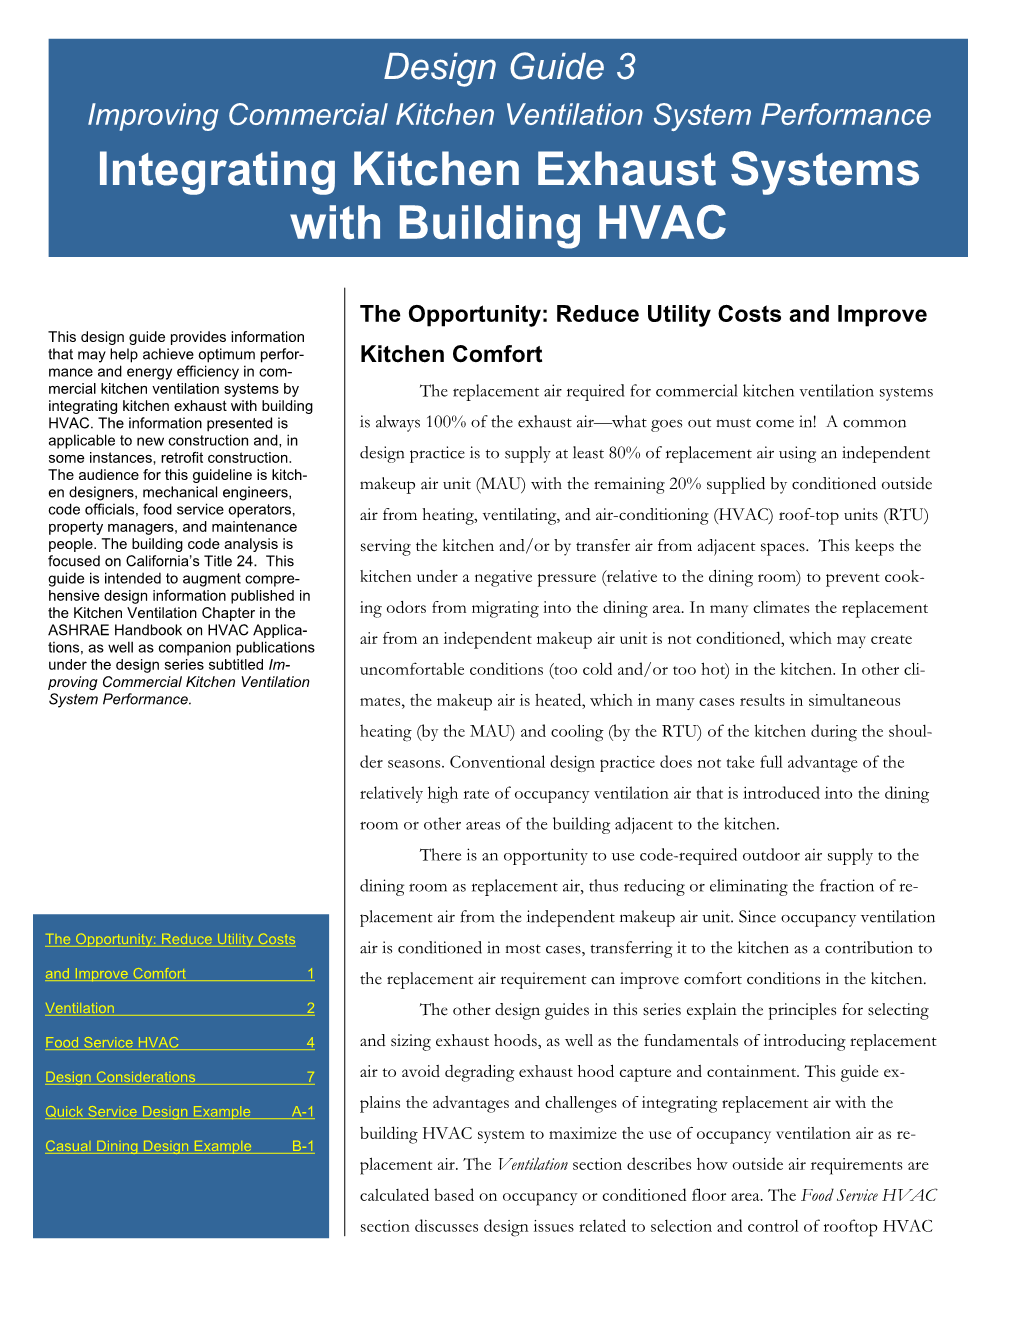 Integrating Kitchen Exhaust Systems with Building HVAC – 07.22.09 2 Ventilation